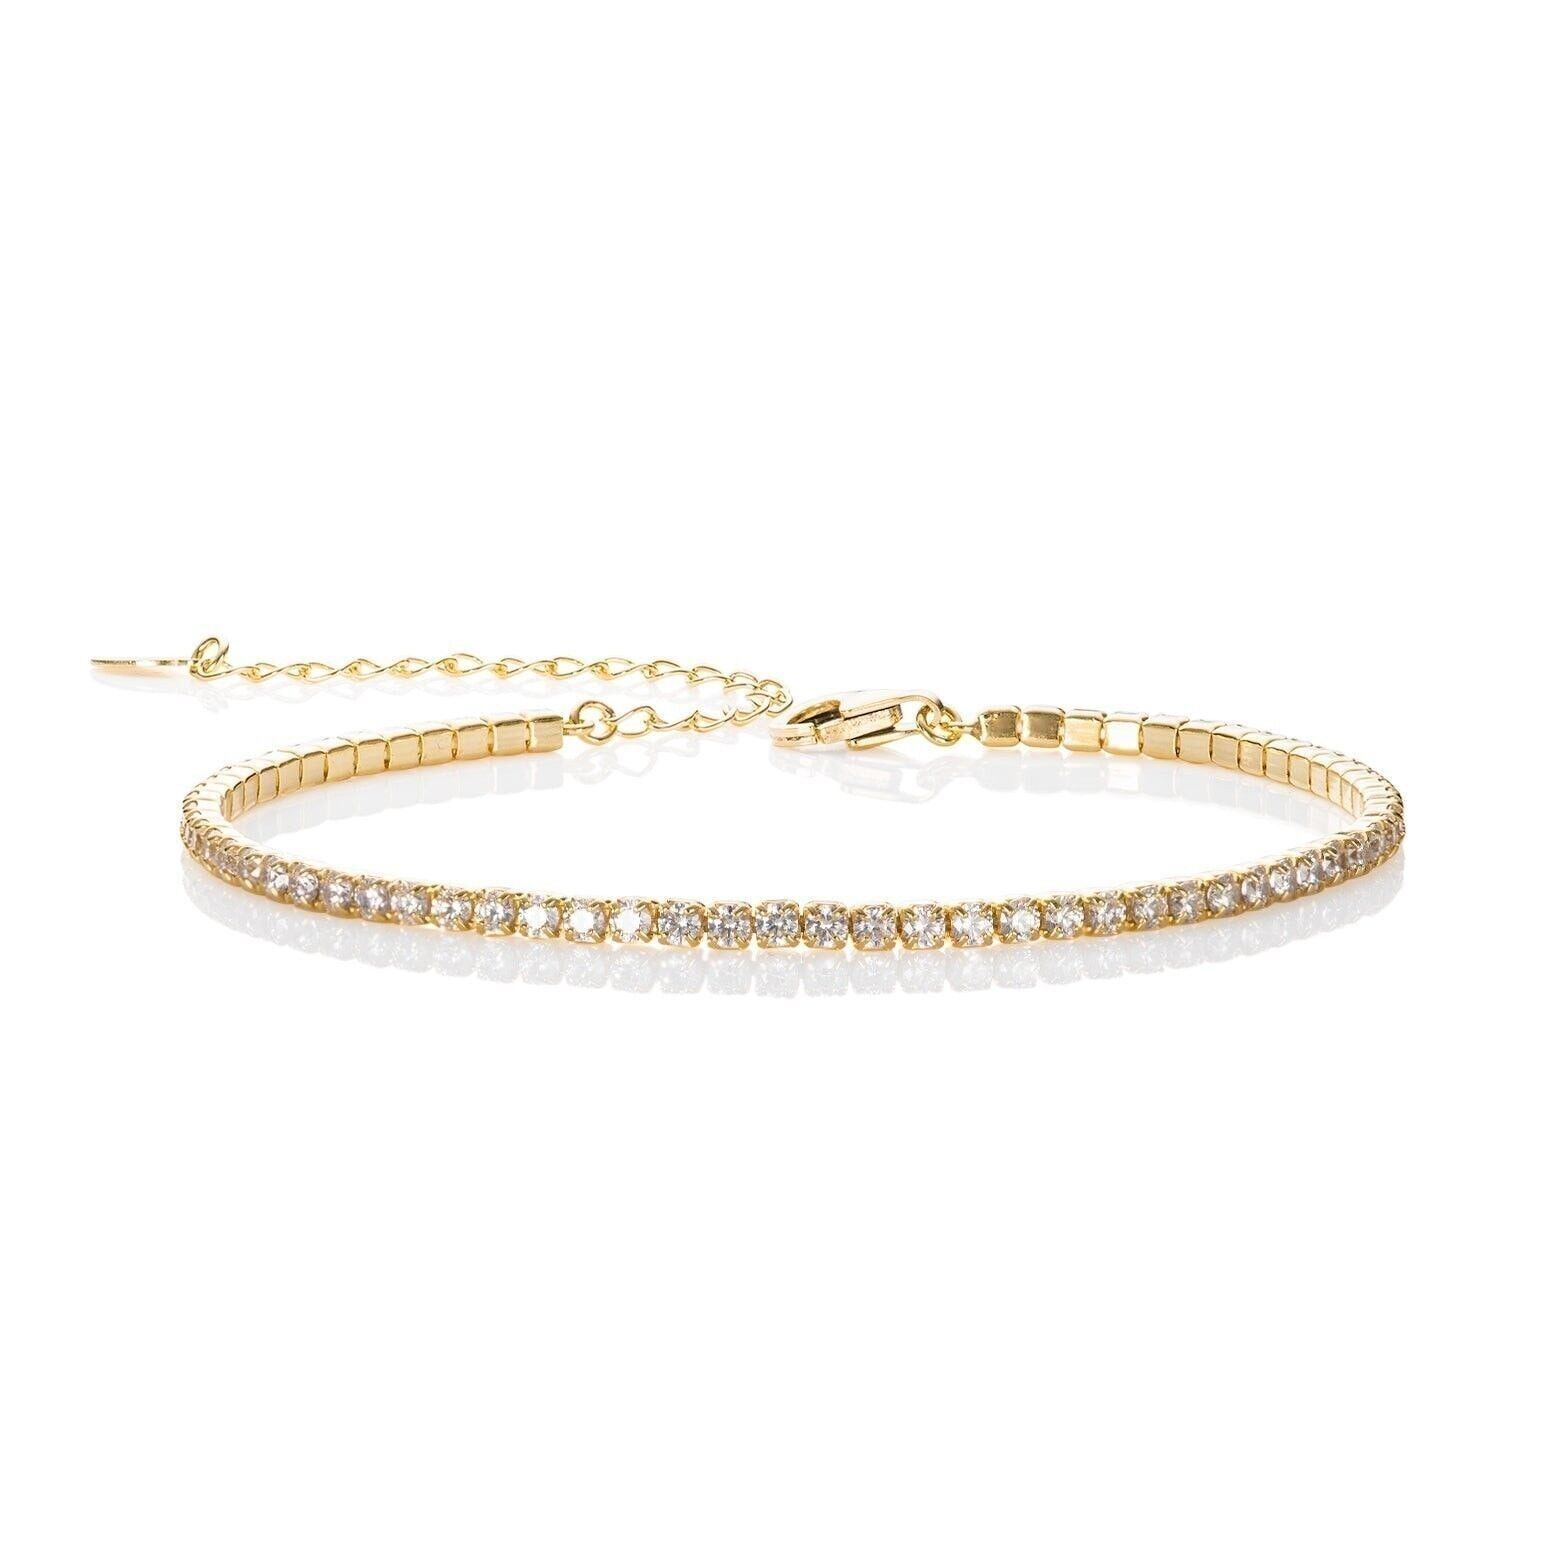 18K Gold Plated Designer Bracelets Jewelry High Quality Love Gift Jewelry  For Women New Stainless Steel Non Fade Bracelet Wholesale From  Denghuangmax, $7.42 | DHgate.Com